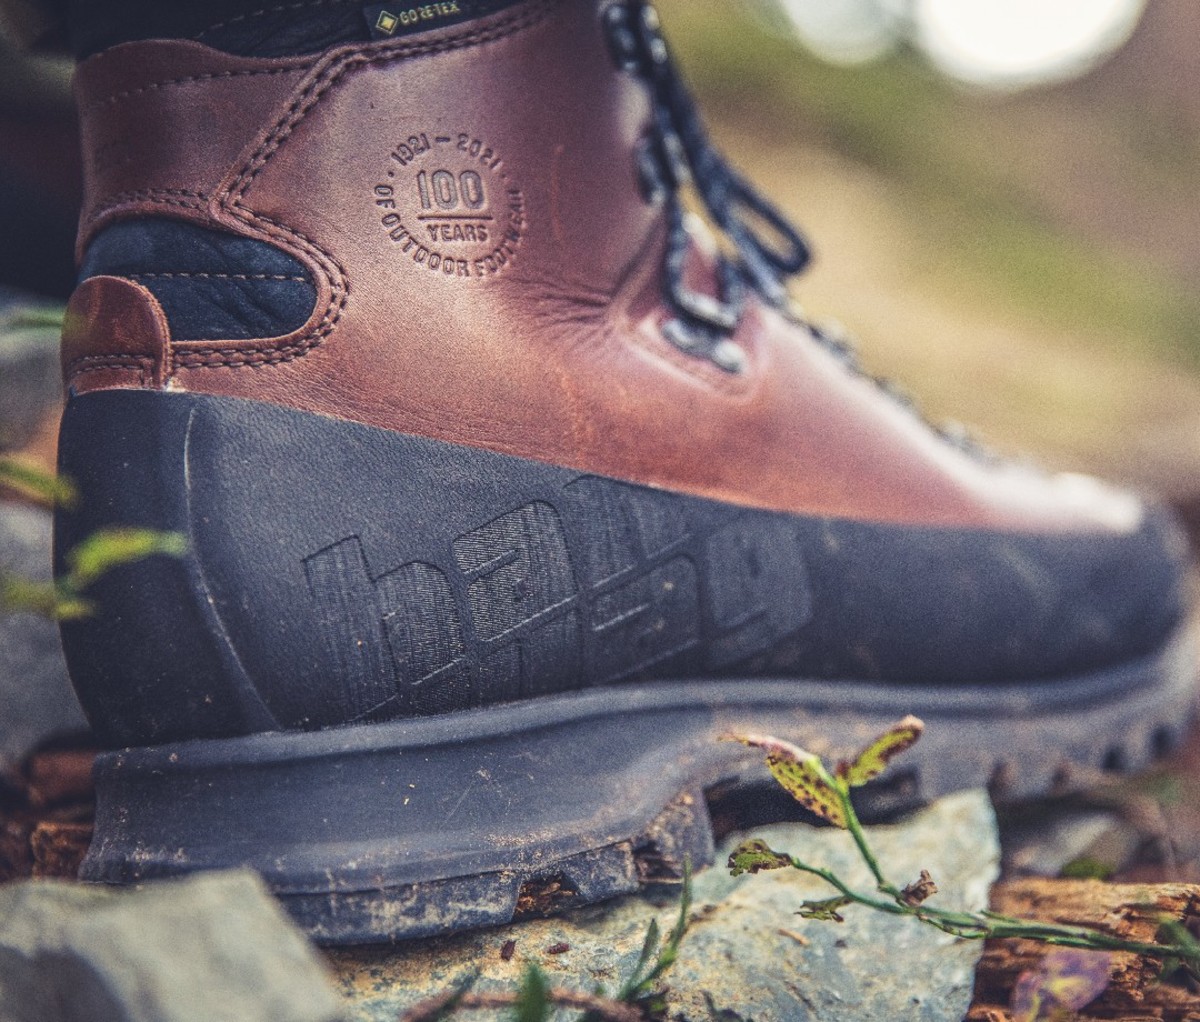 Rugged leather hiking boot